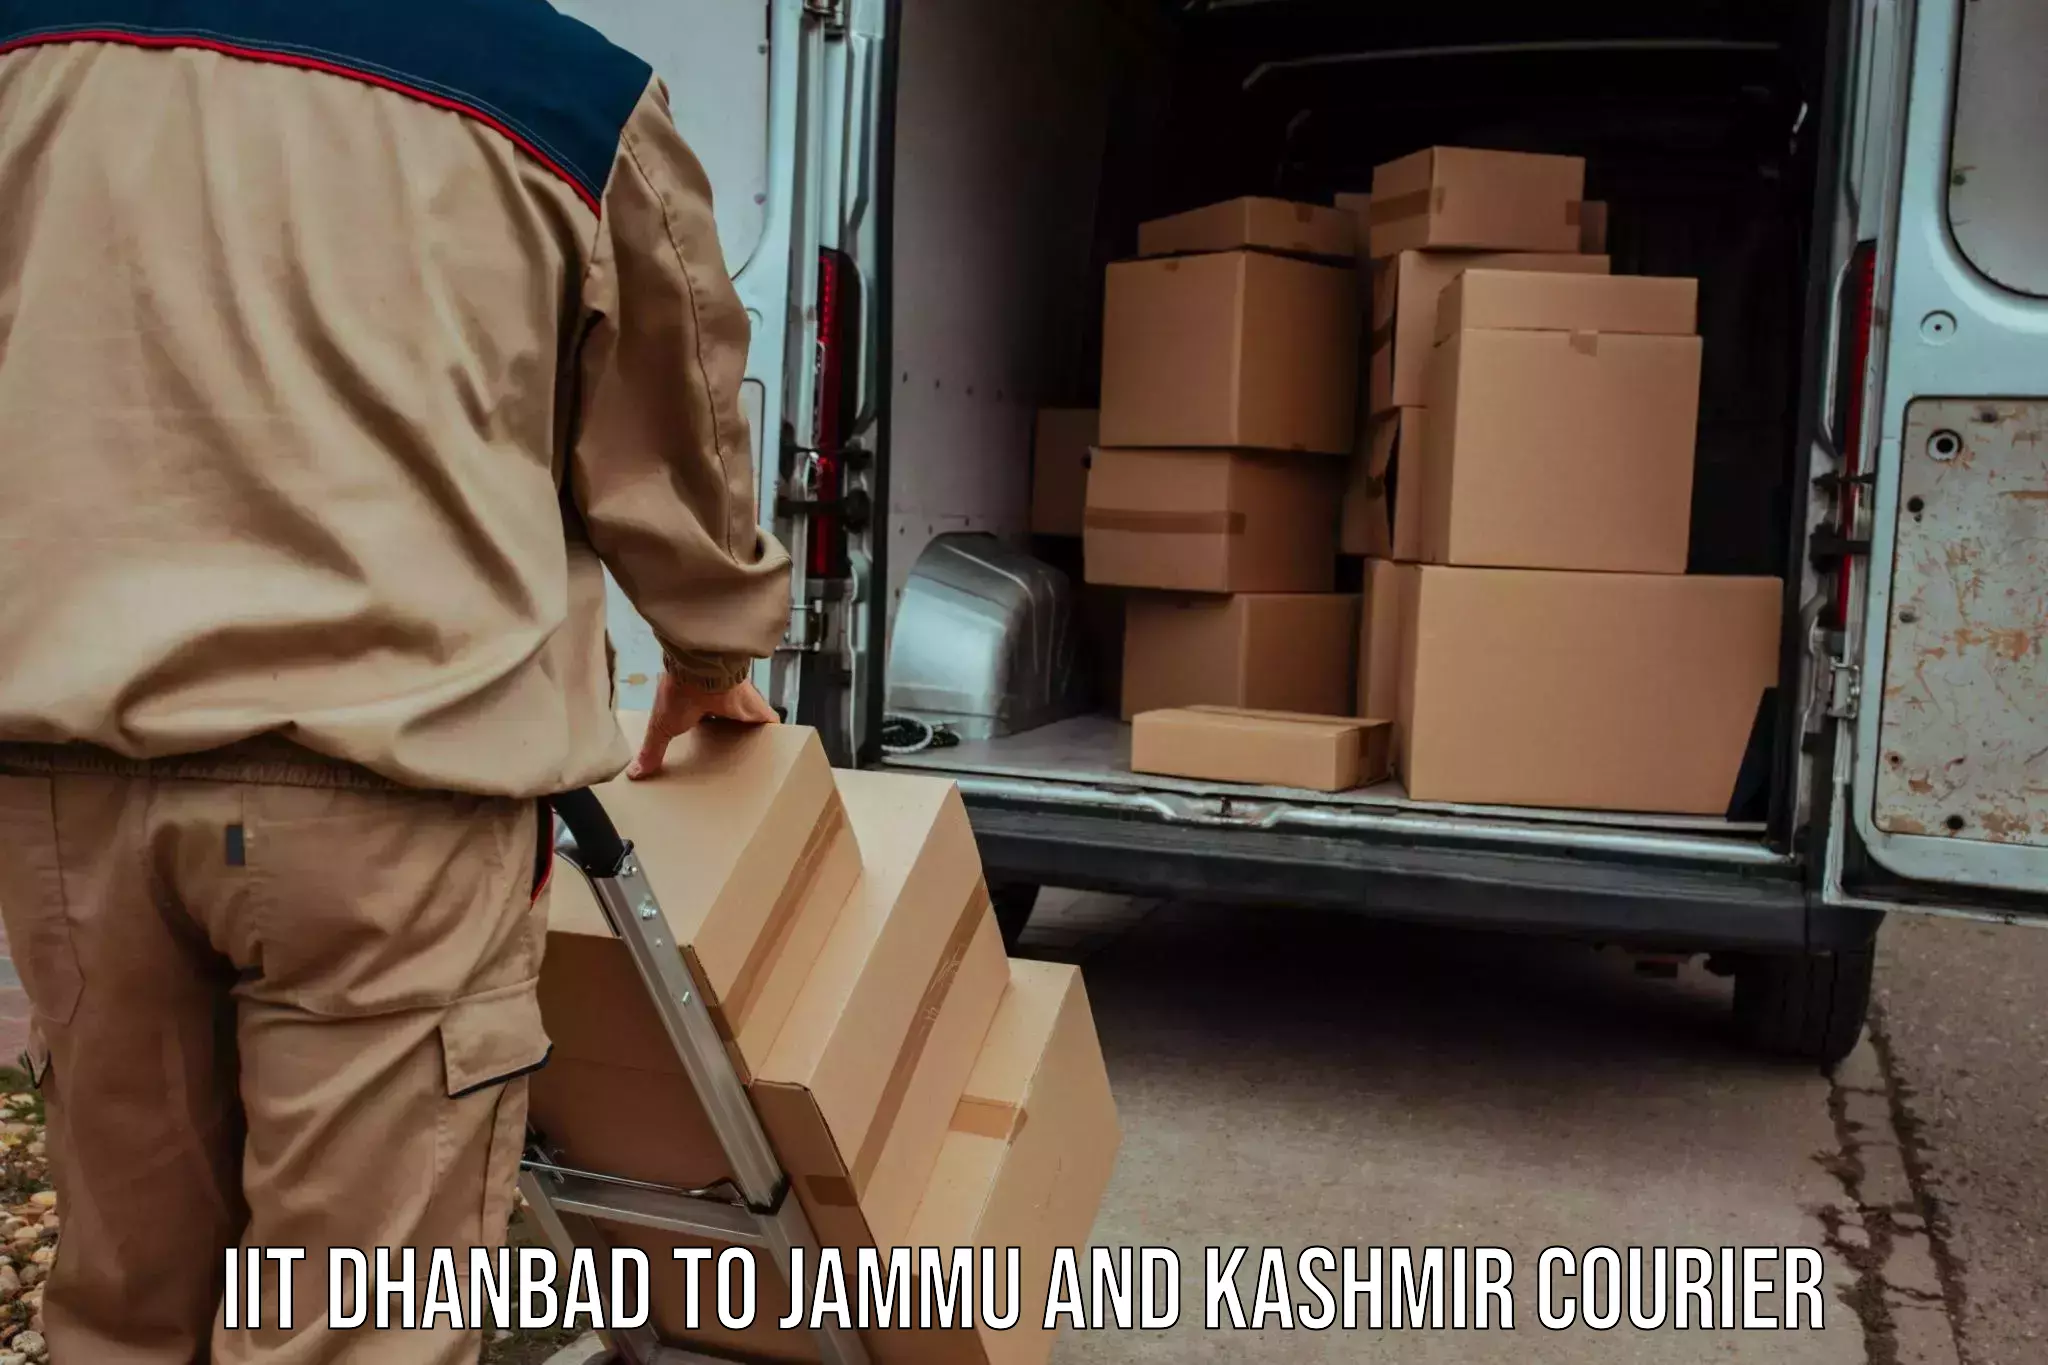 High-priority parcel service IIT Dhanbad to Bandipur